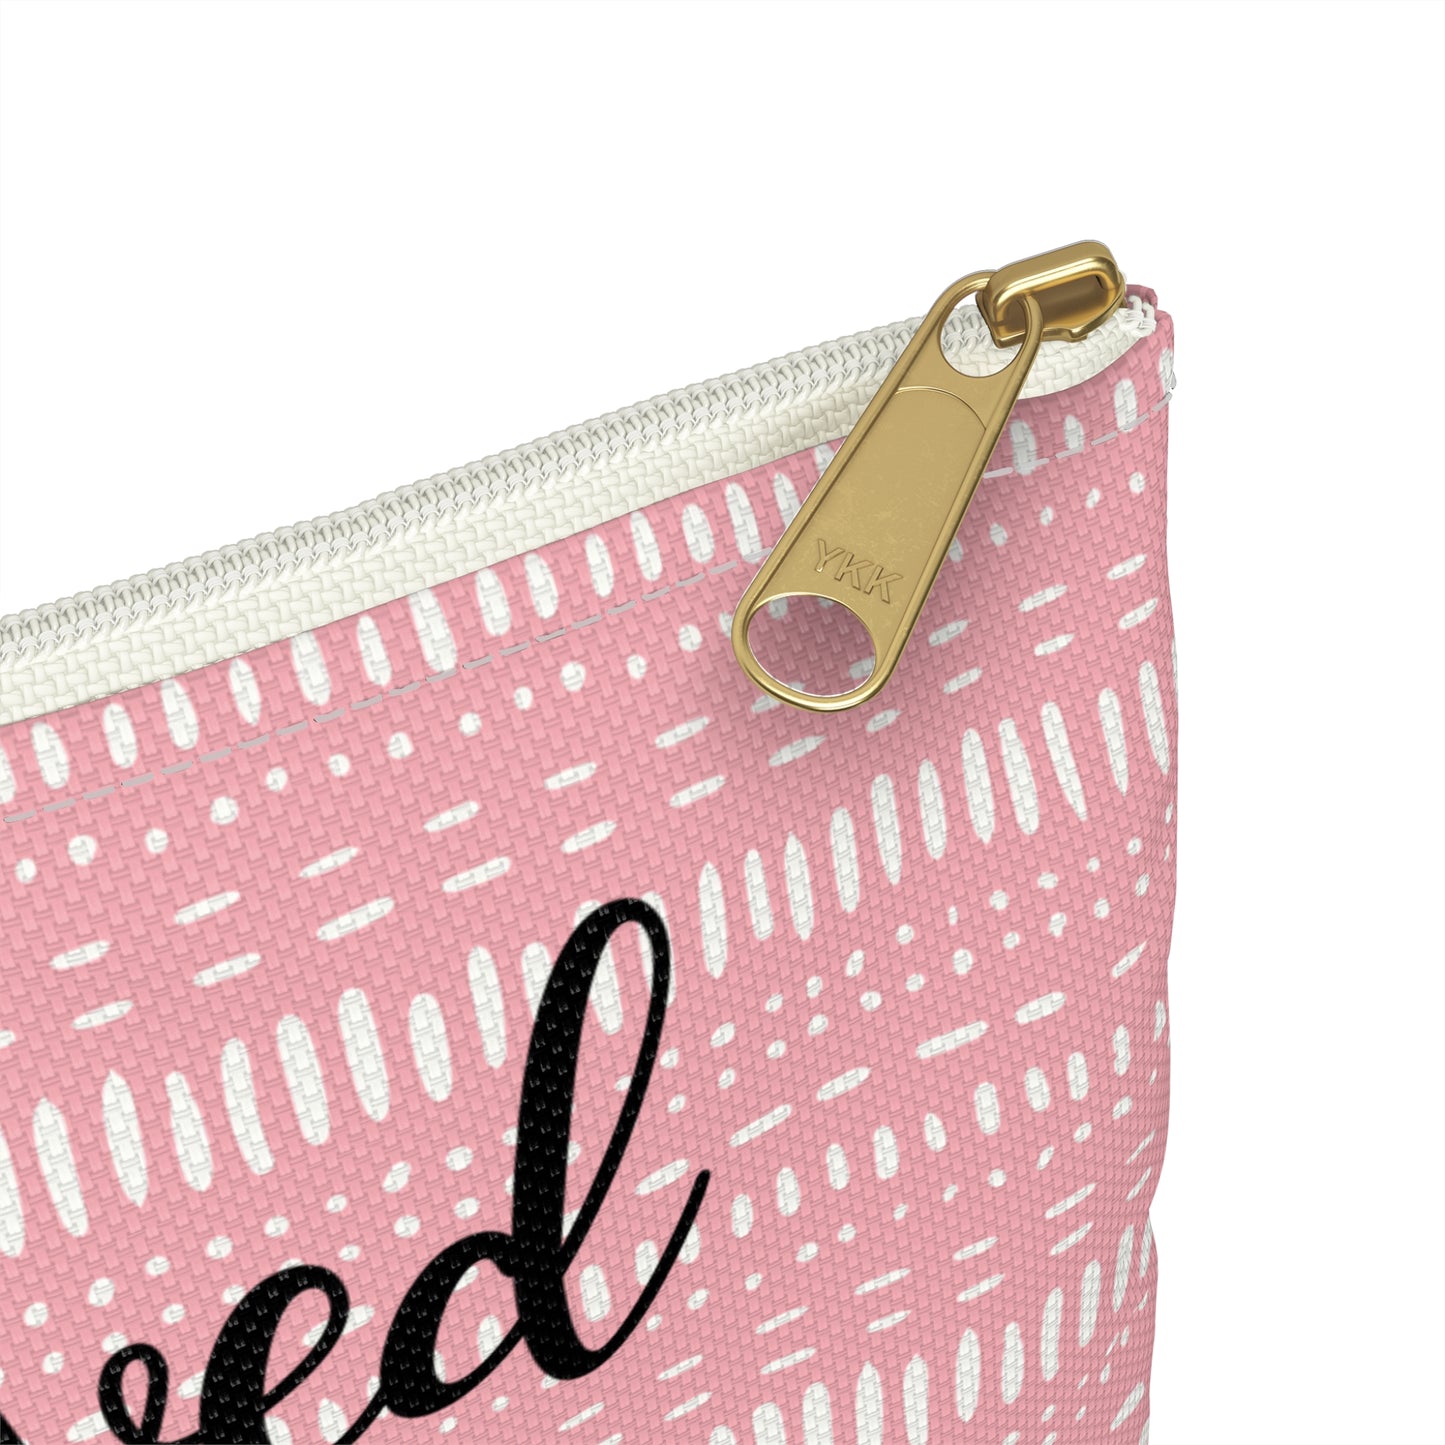 Pink Boho - She Believed She Could So She Did - Inspirational - Accessory Pouch / Makeup Case / Travel Pouch / Pencil case / Art Case